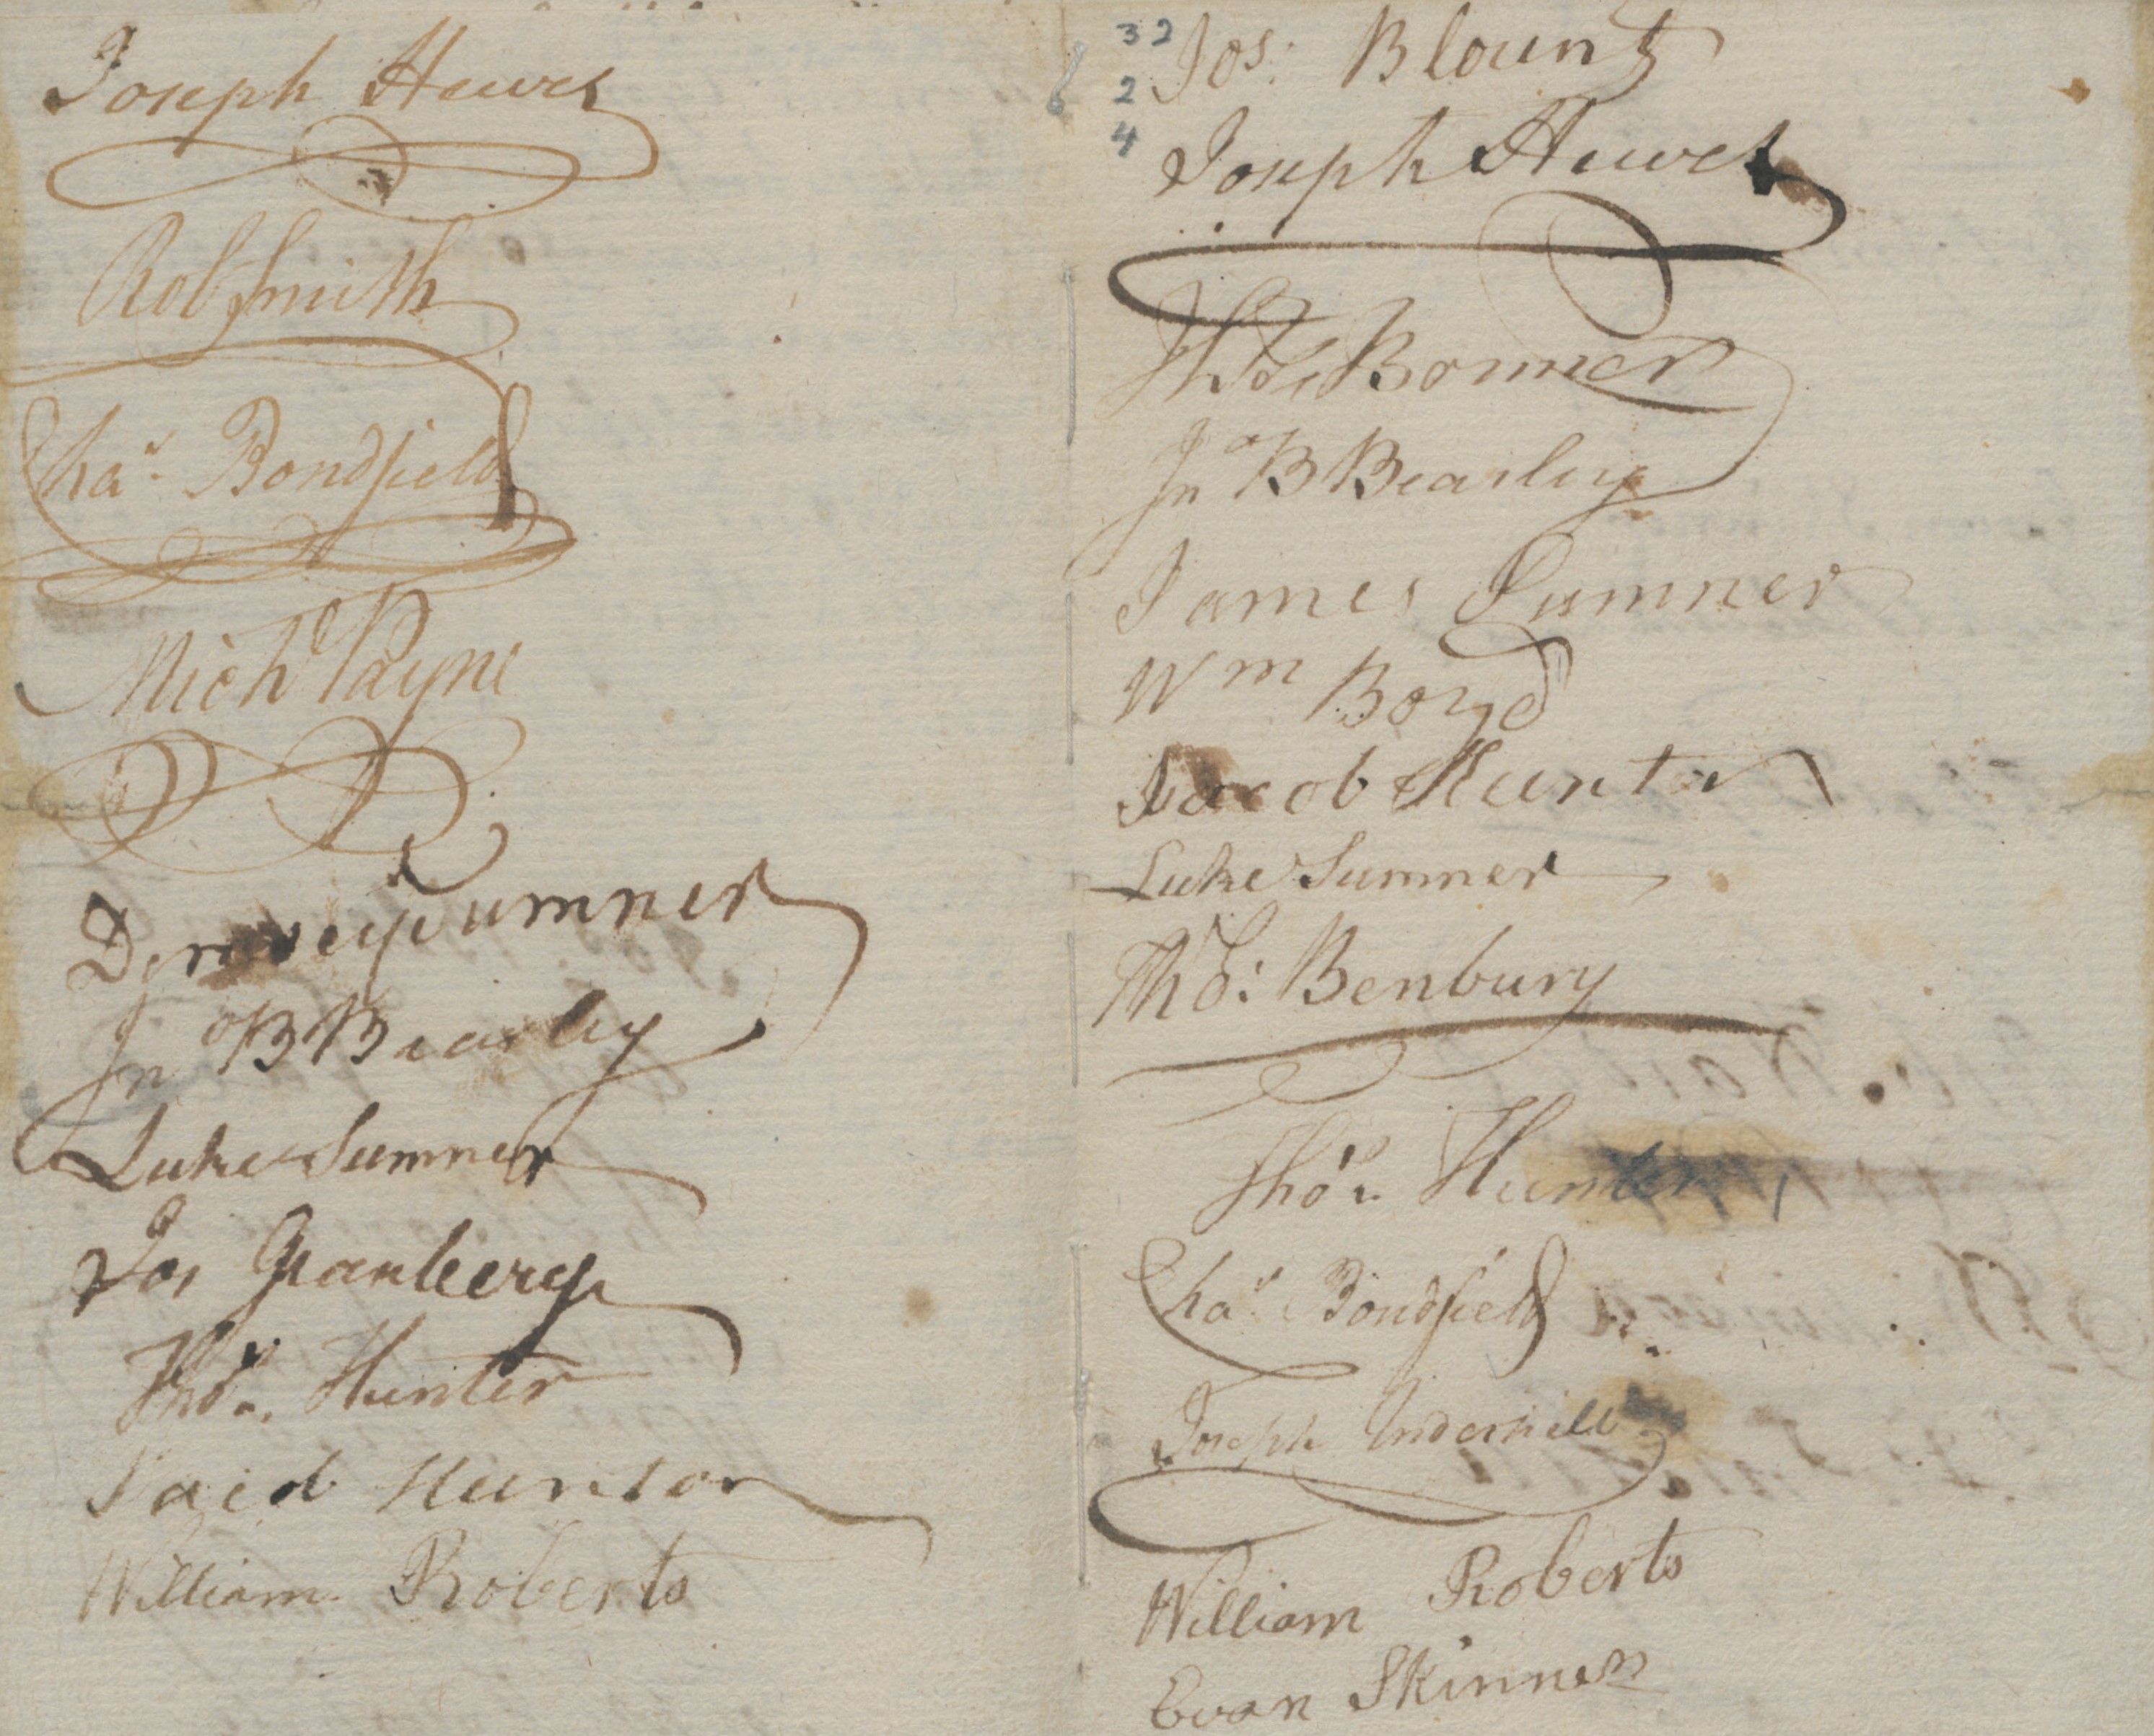 List of Civil and Military Officers Swearing the Oath of Allegiance to the State of North Carolina, circa 1777, page 4